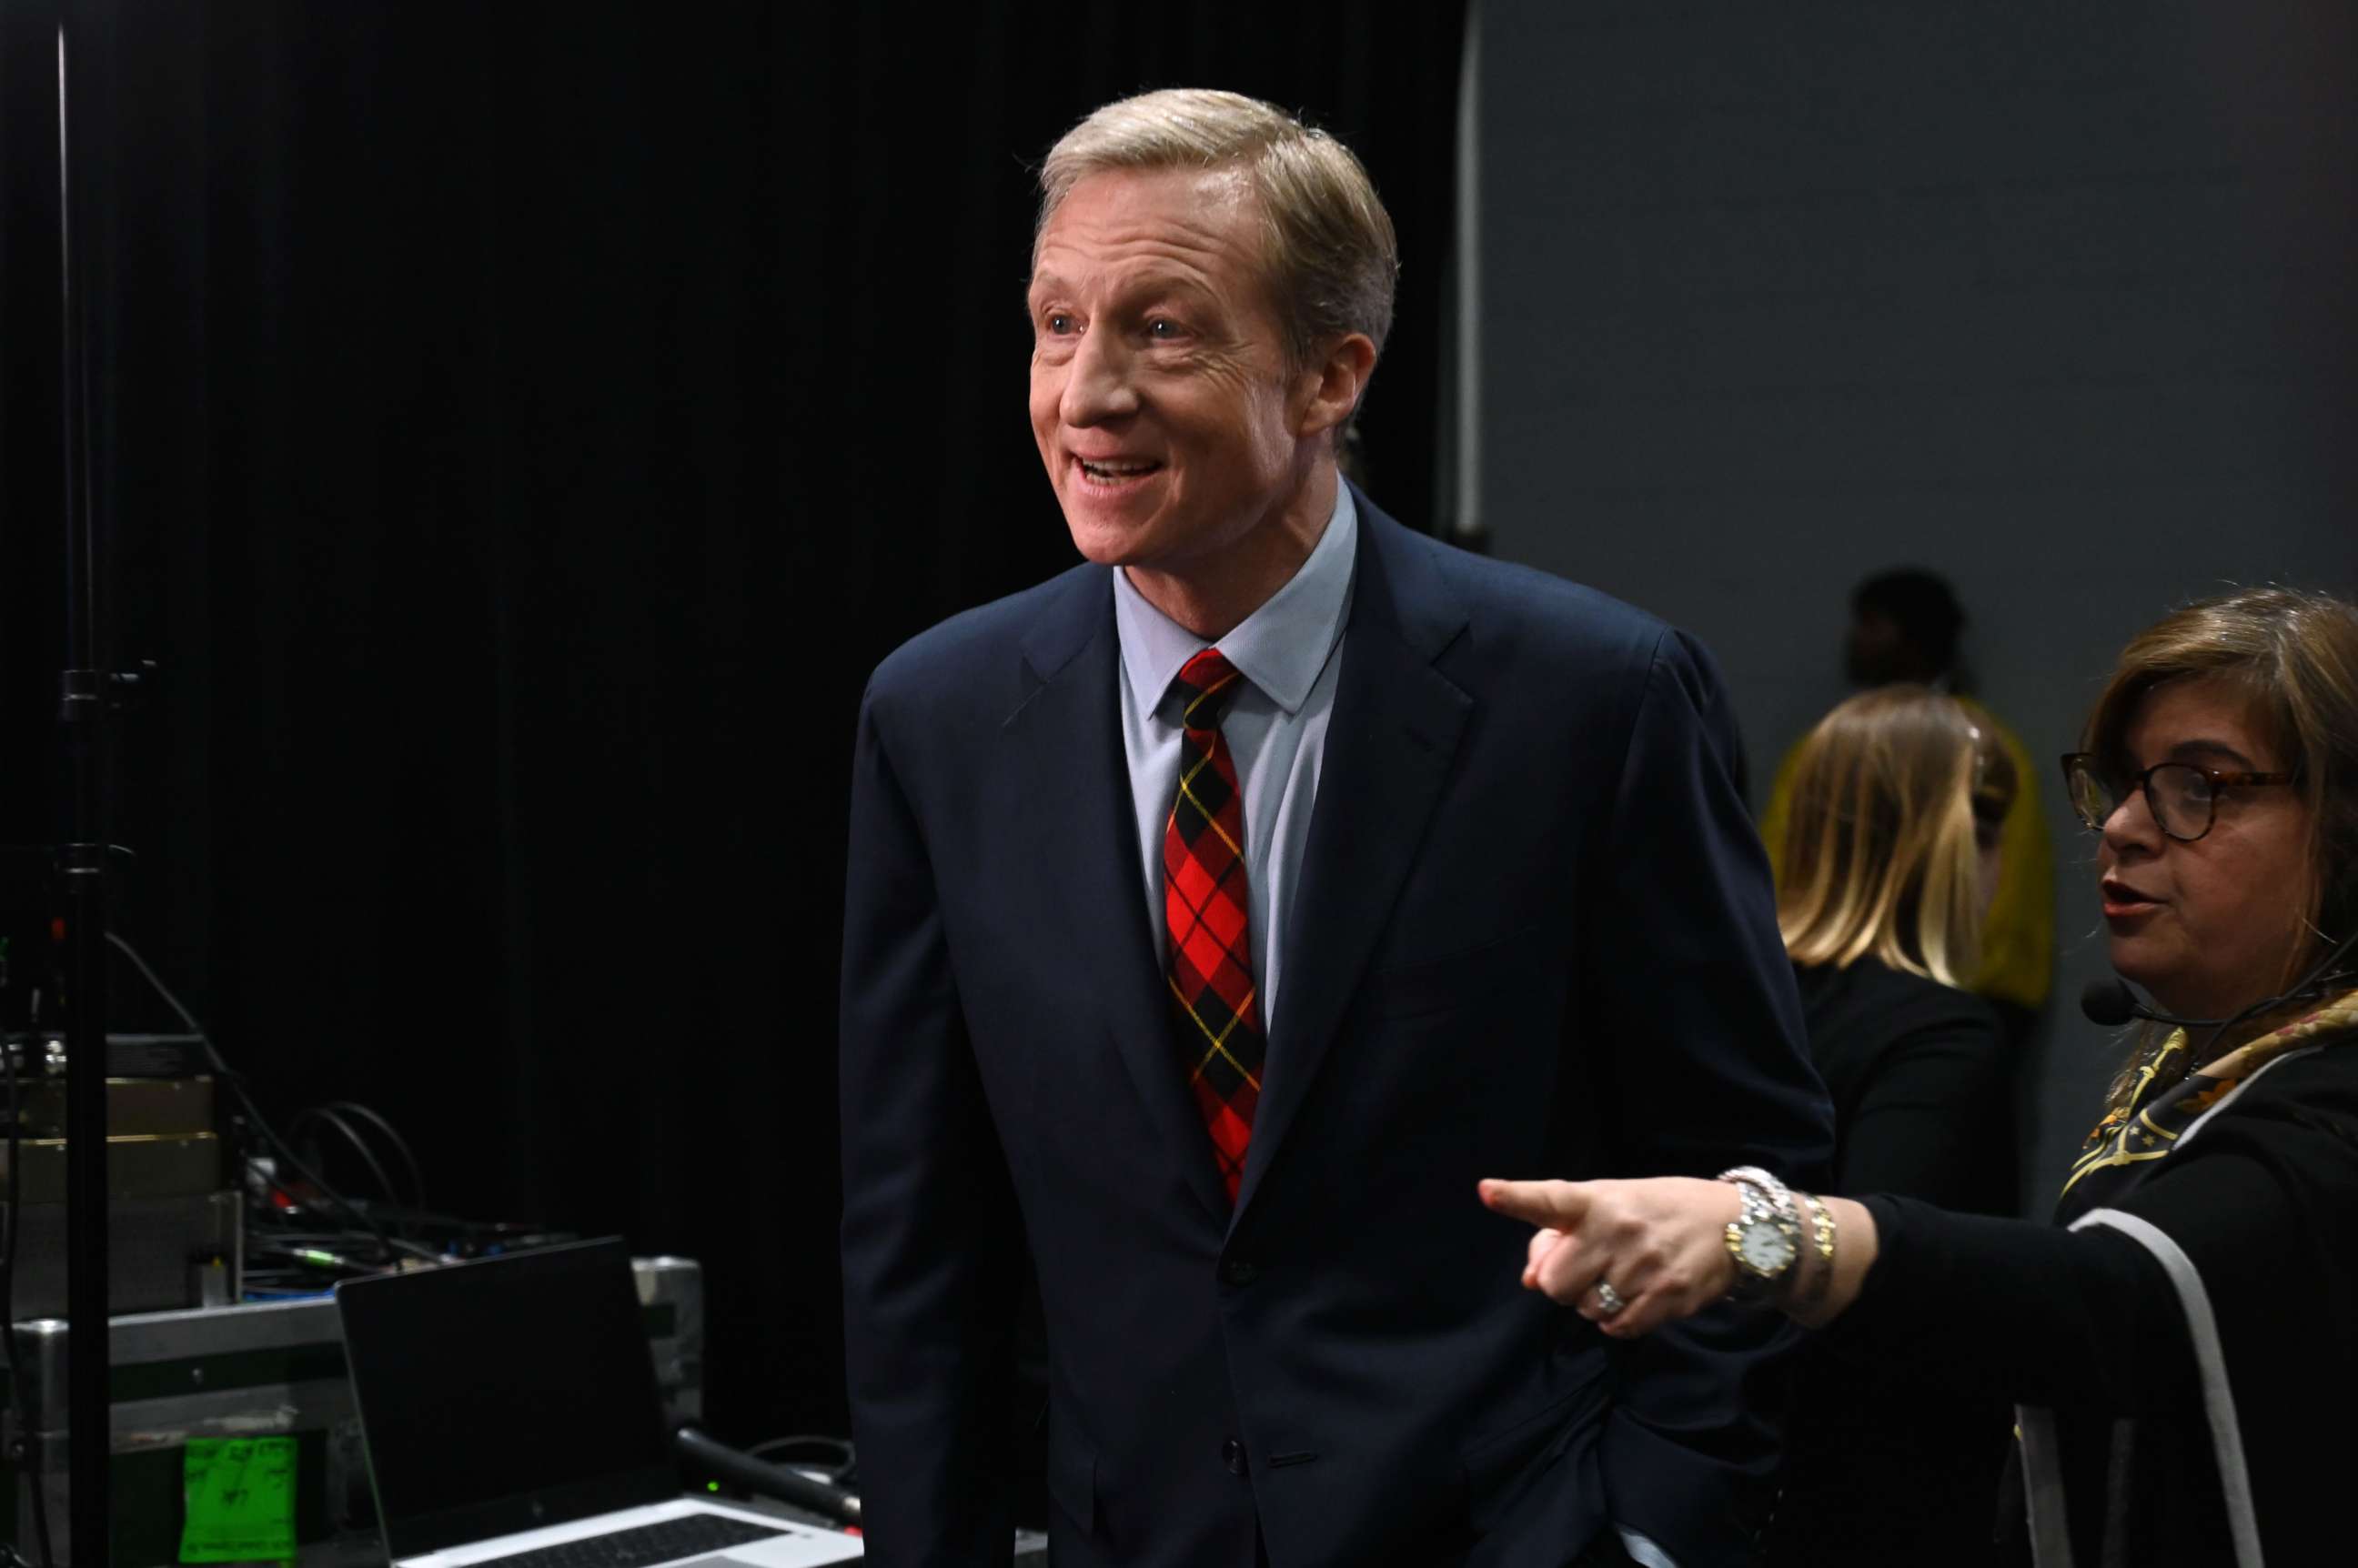 PHOTO: Democratic presidential hopeful Tom Steyer arrives in the spin room after the sixth Democratic primary debate at Loyola Marymount University in Los Angeles, Dec. 19, 2019.